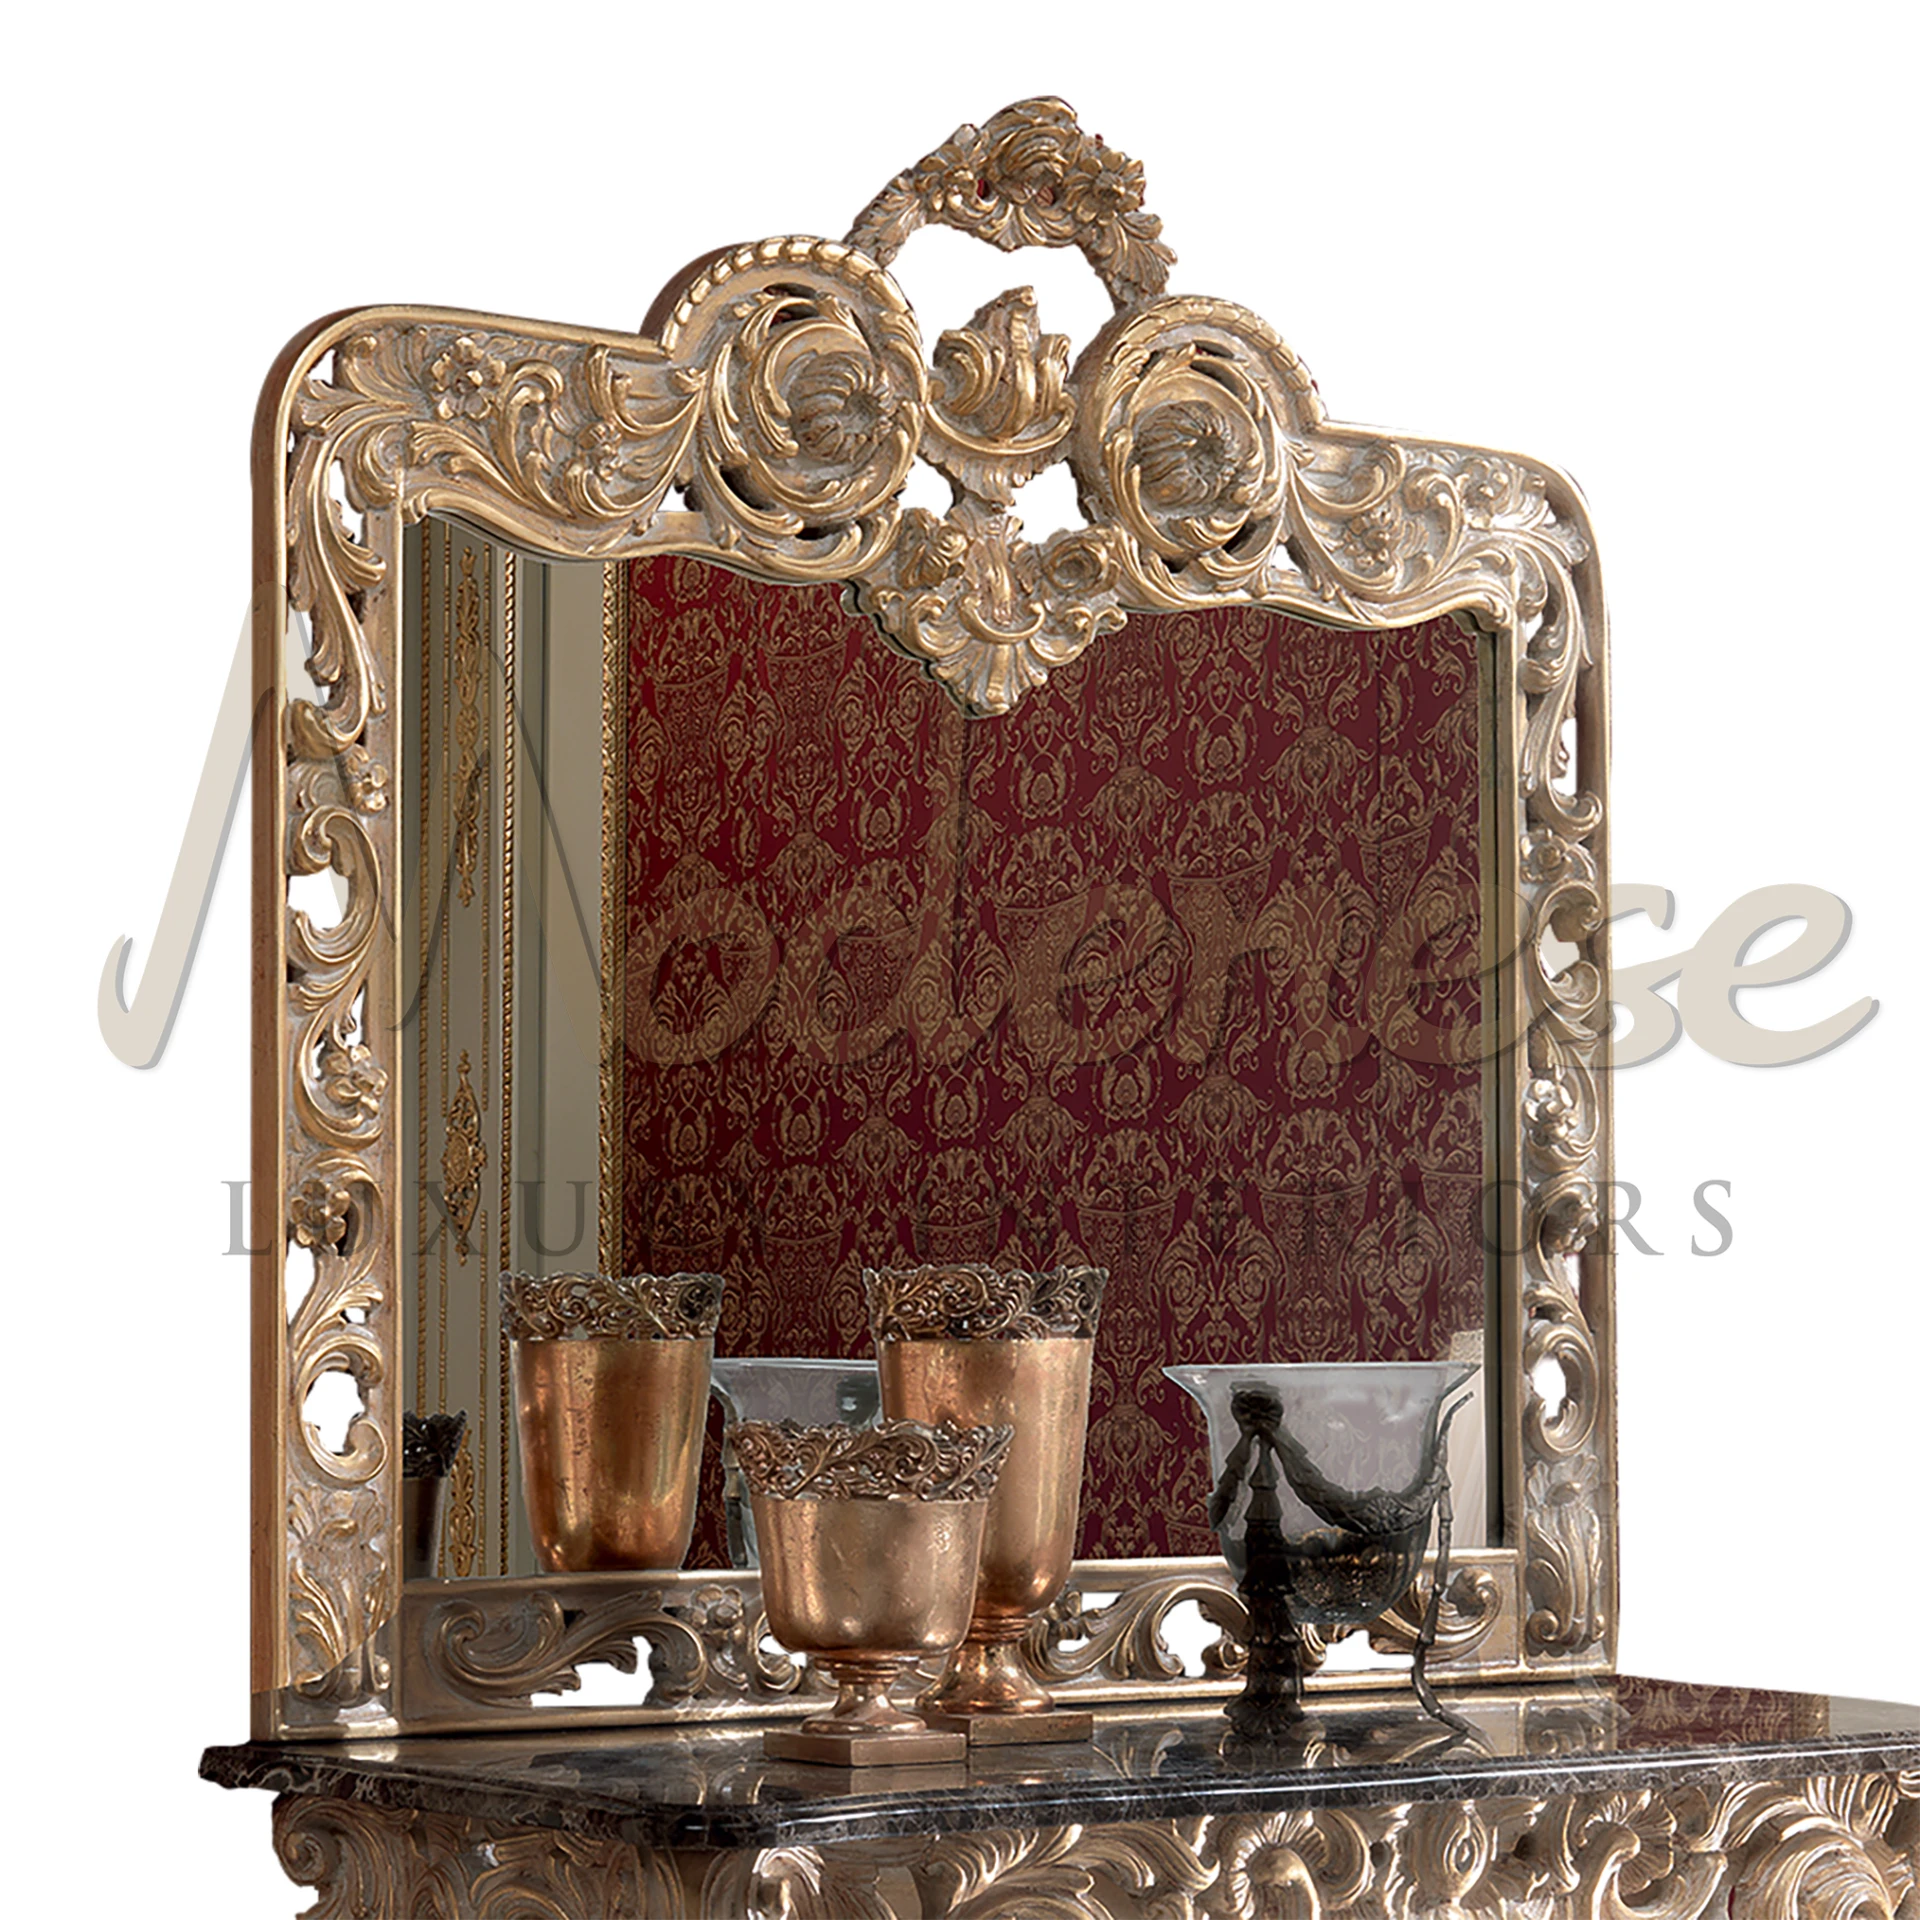 Stunning Ornate Mirror, featuring intricate baroque embellishments, adds timeless elegance to luxury interior design.